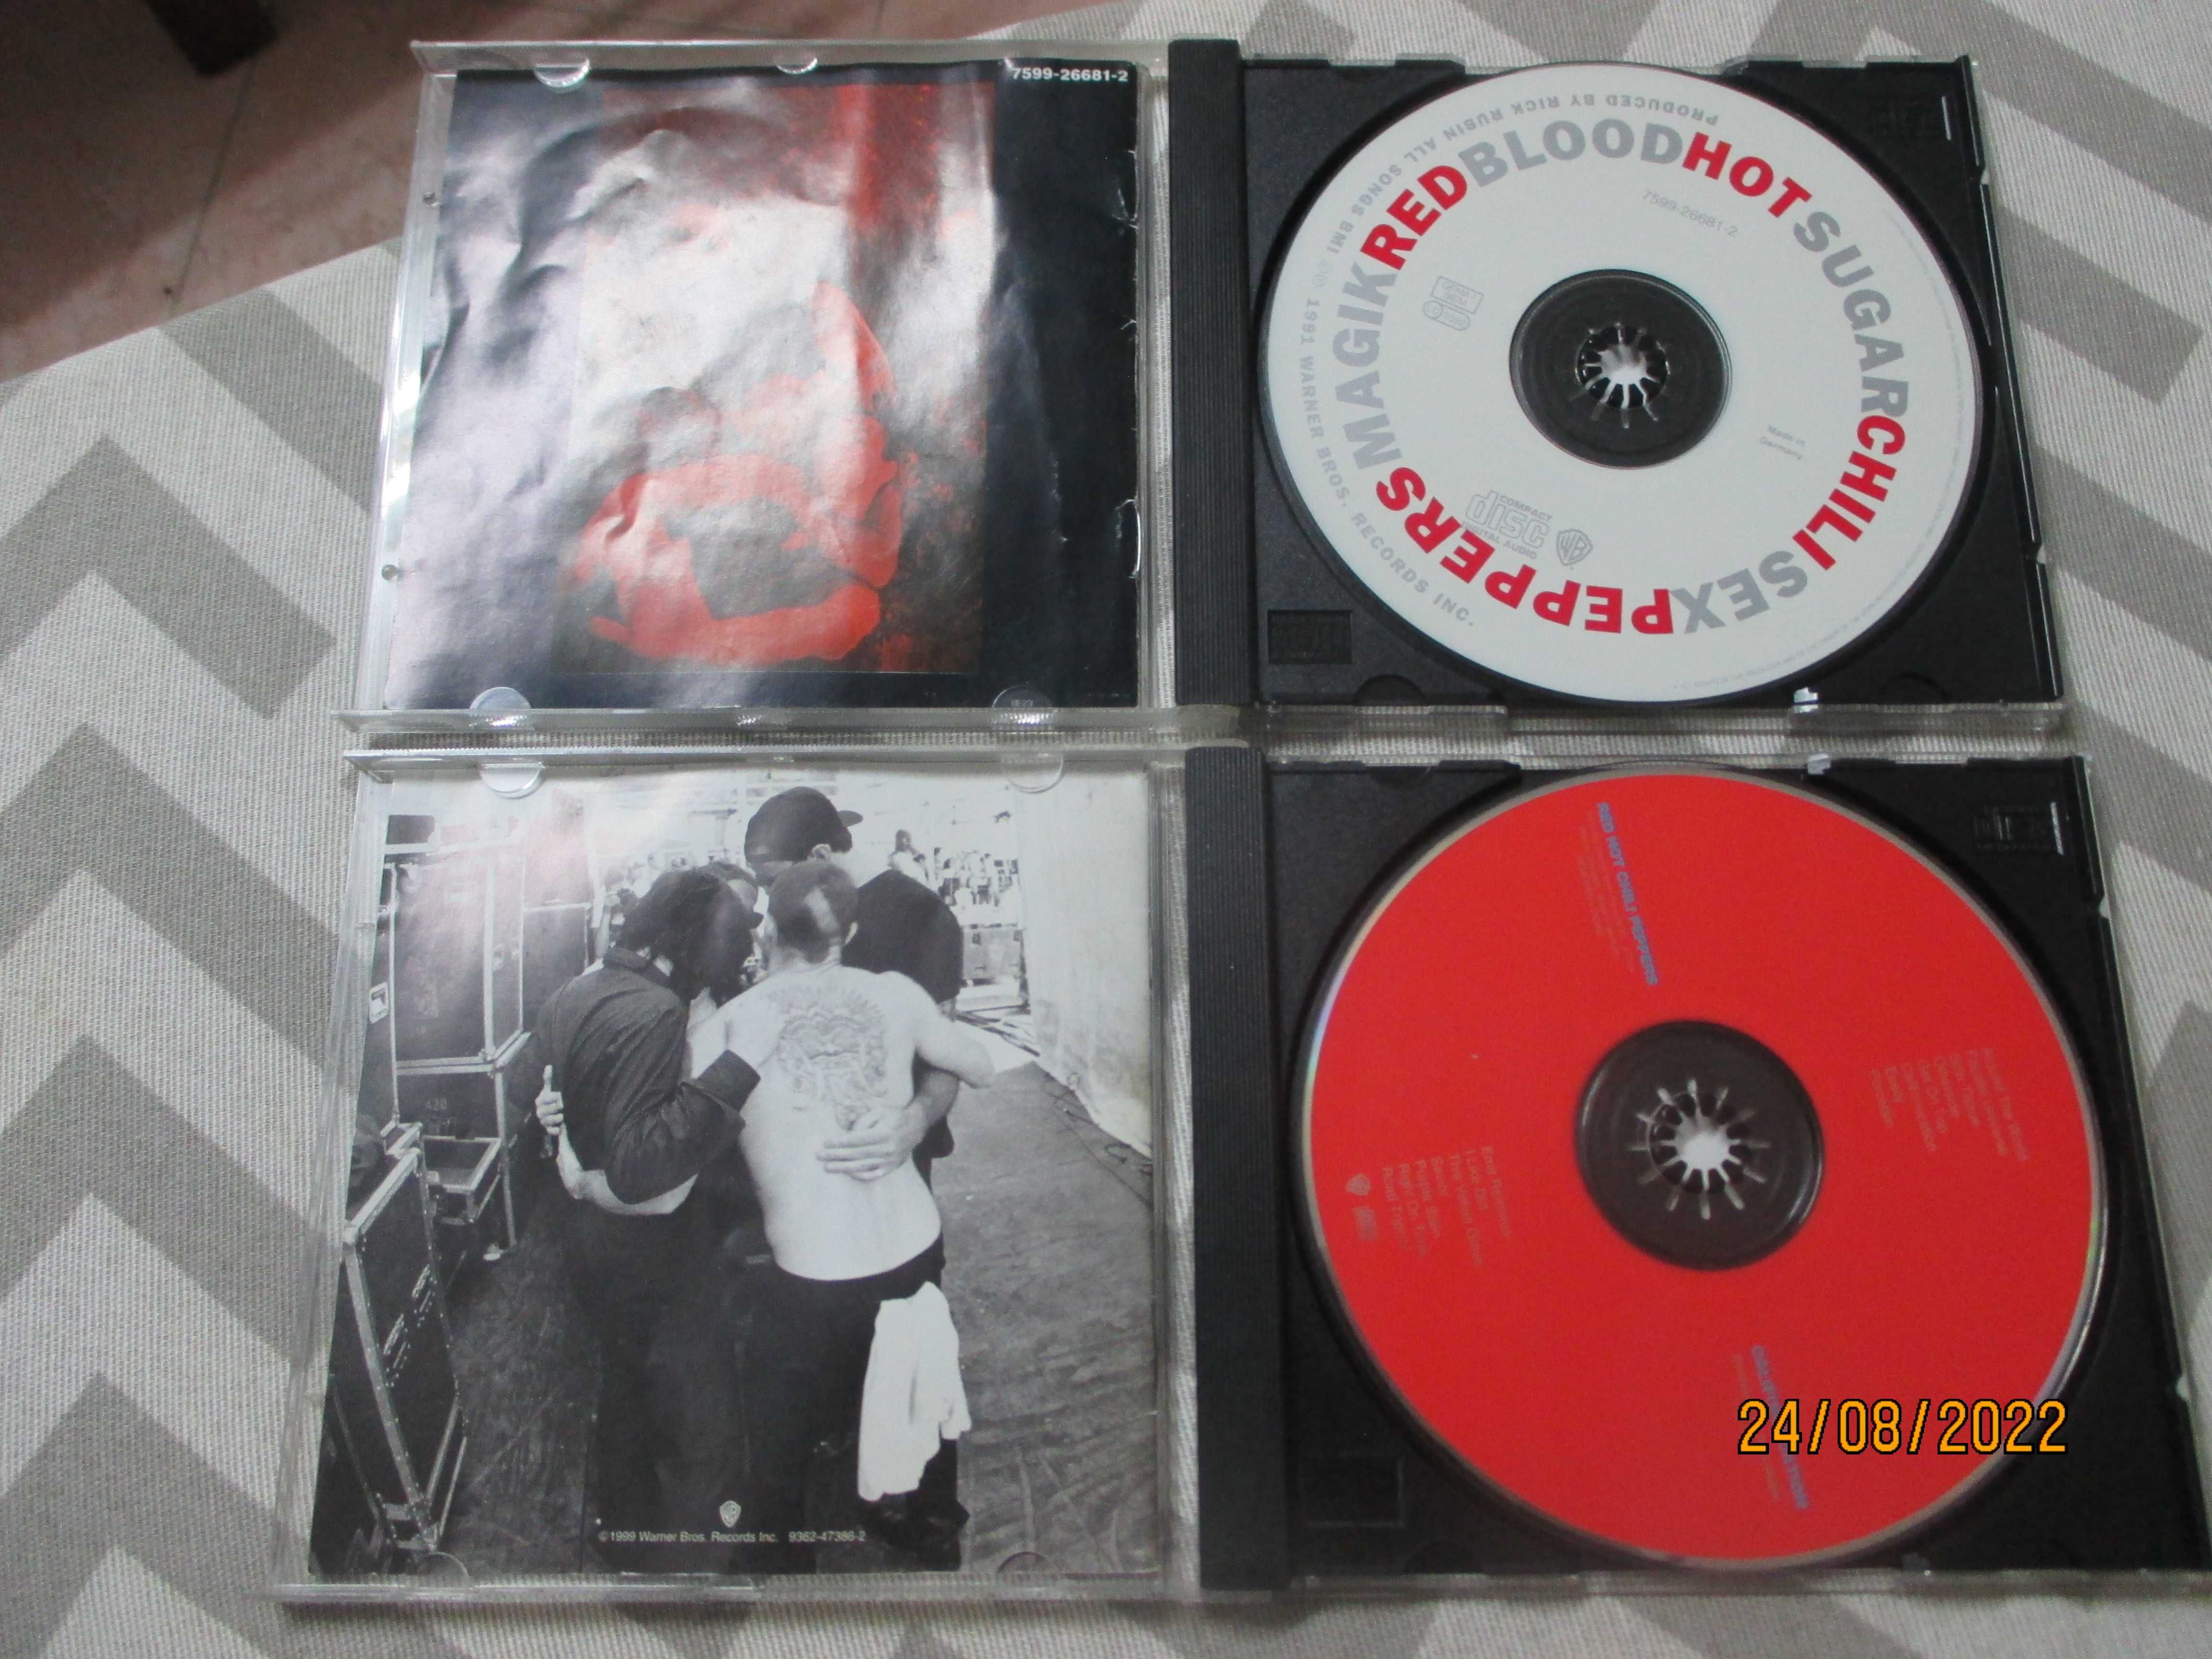 2 cds - Red Hot chili peppers